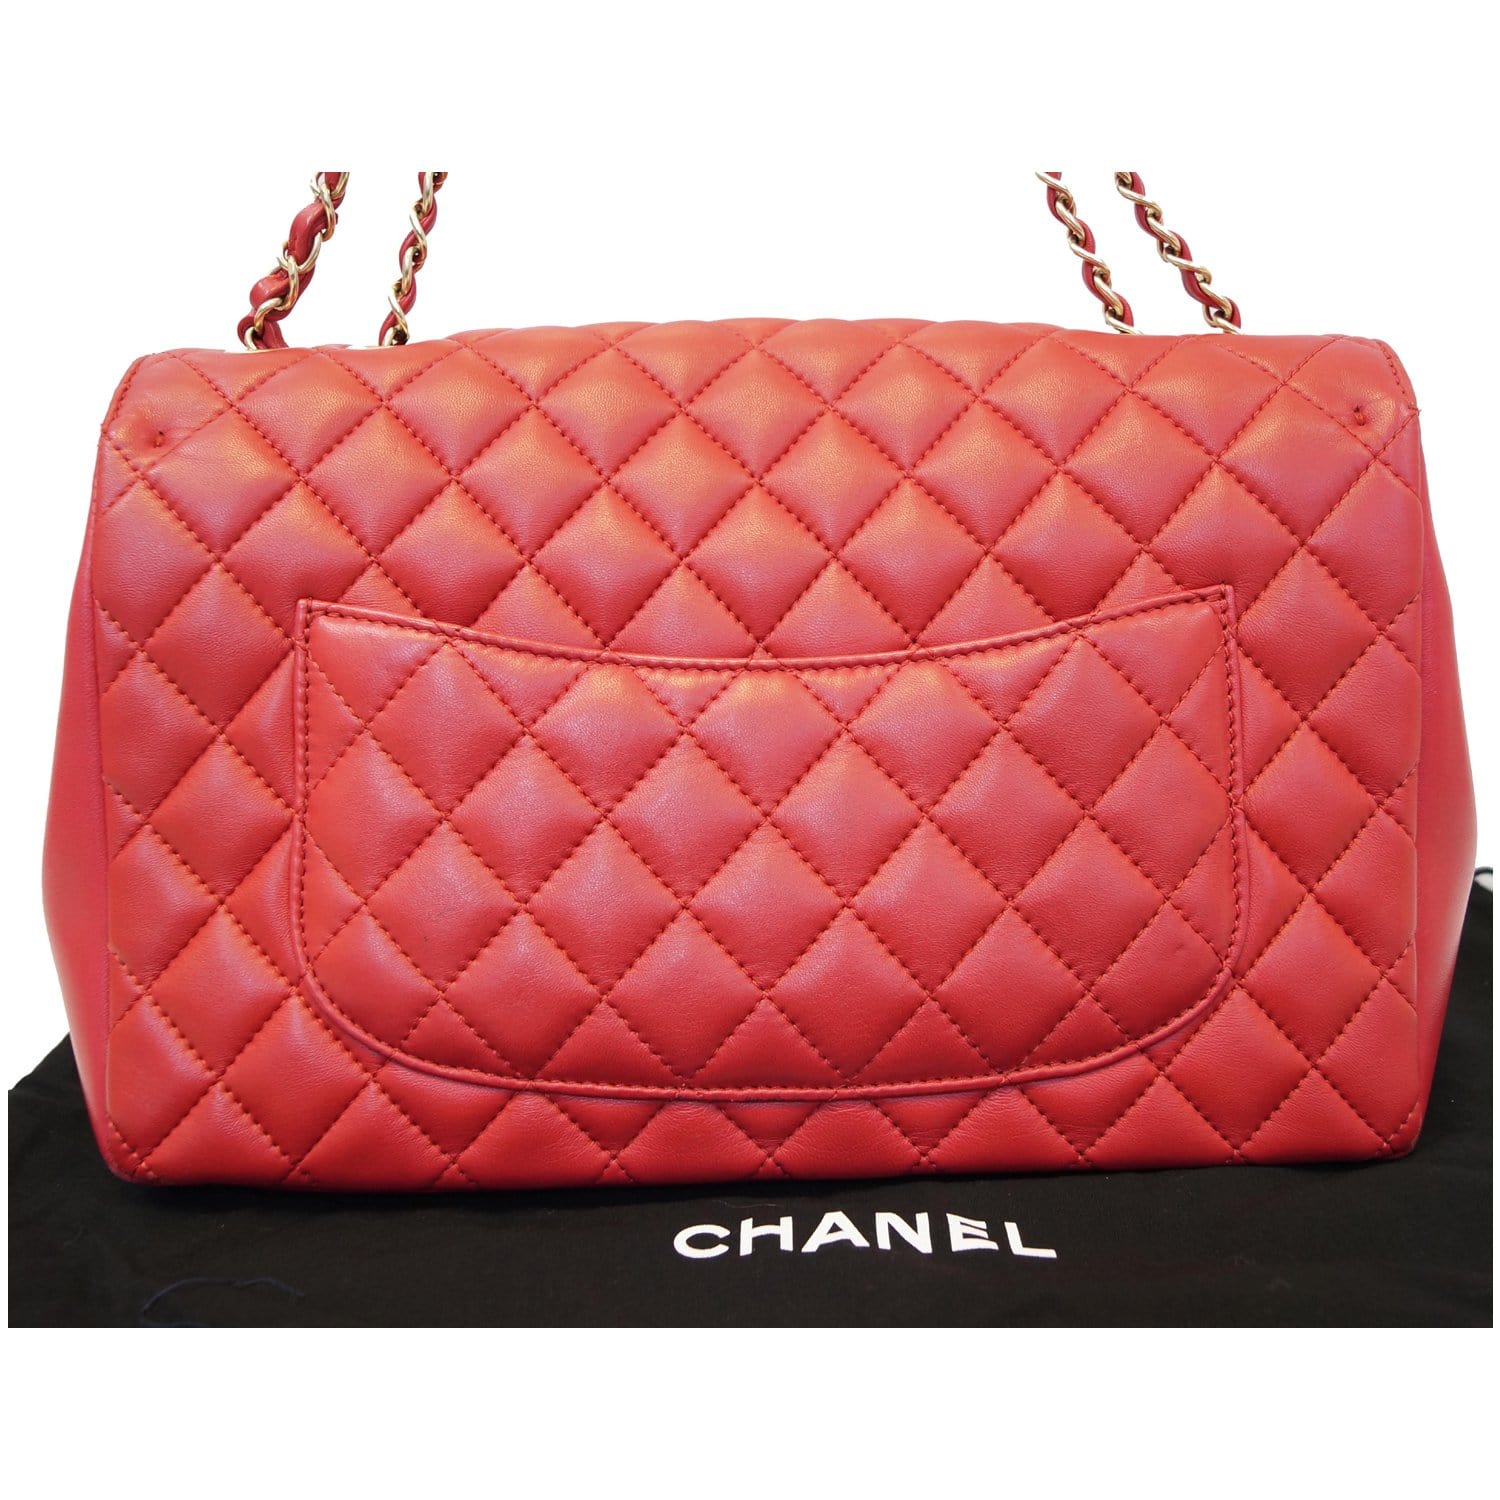 Chanel Classic Quilted Double Flap Patent Jumbo Bag in Dark Red